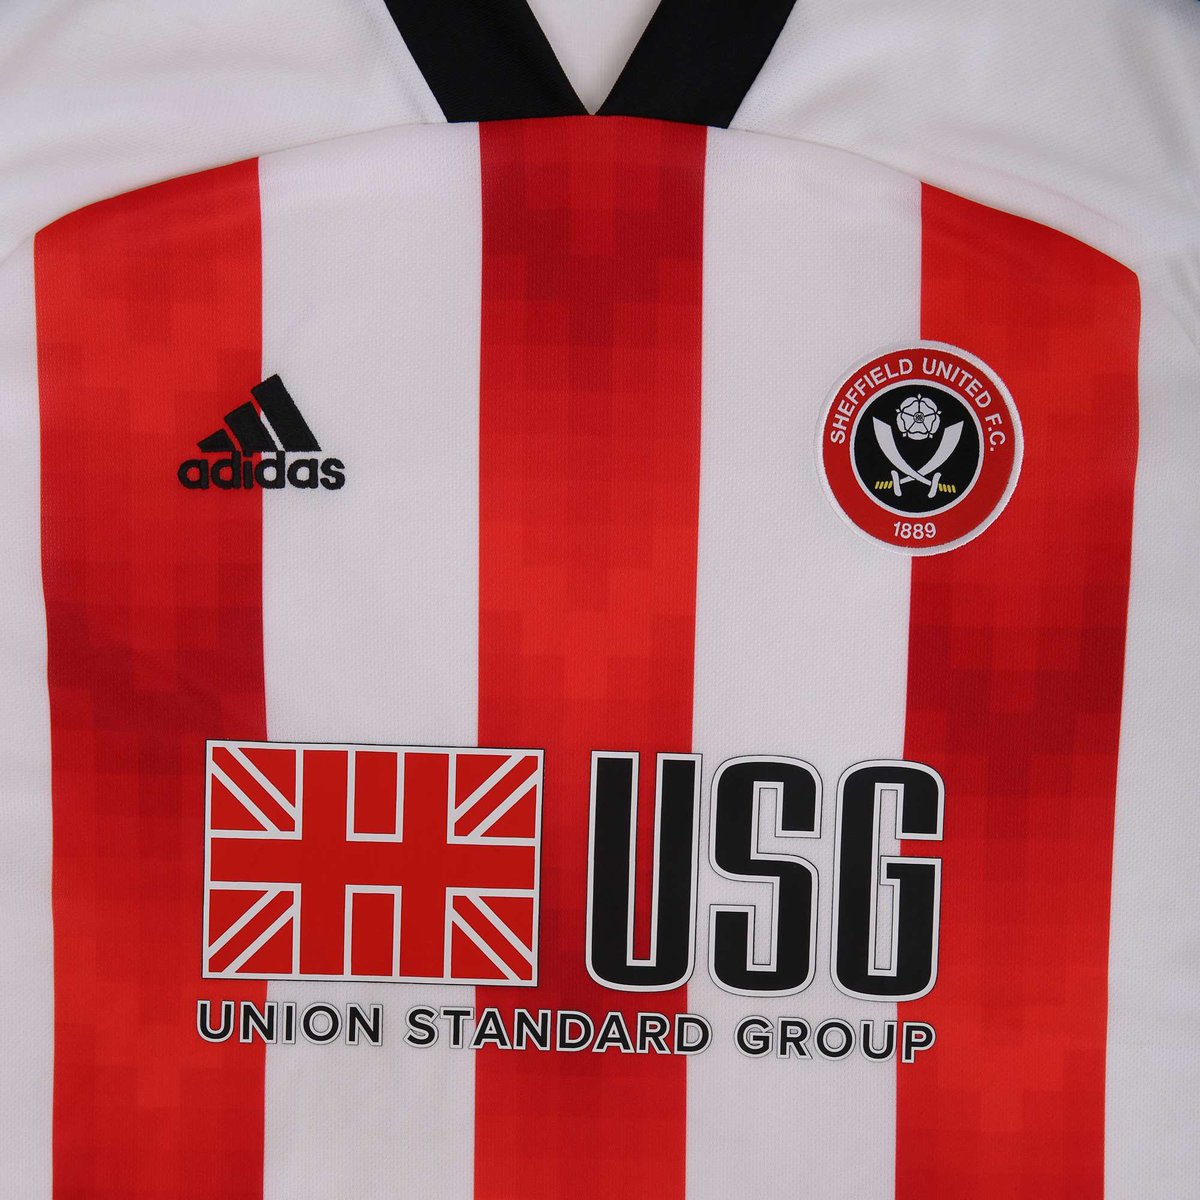 Three colours on the badge, same three colours on the shirt and the sponsor